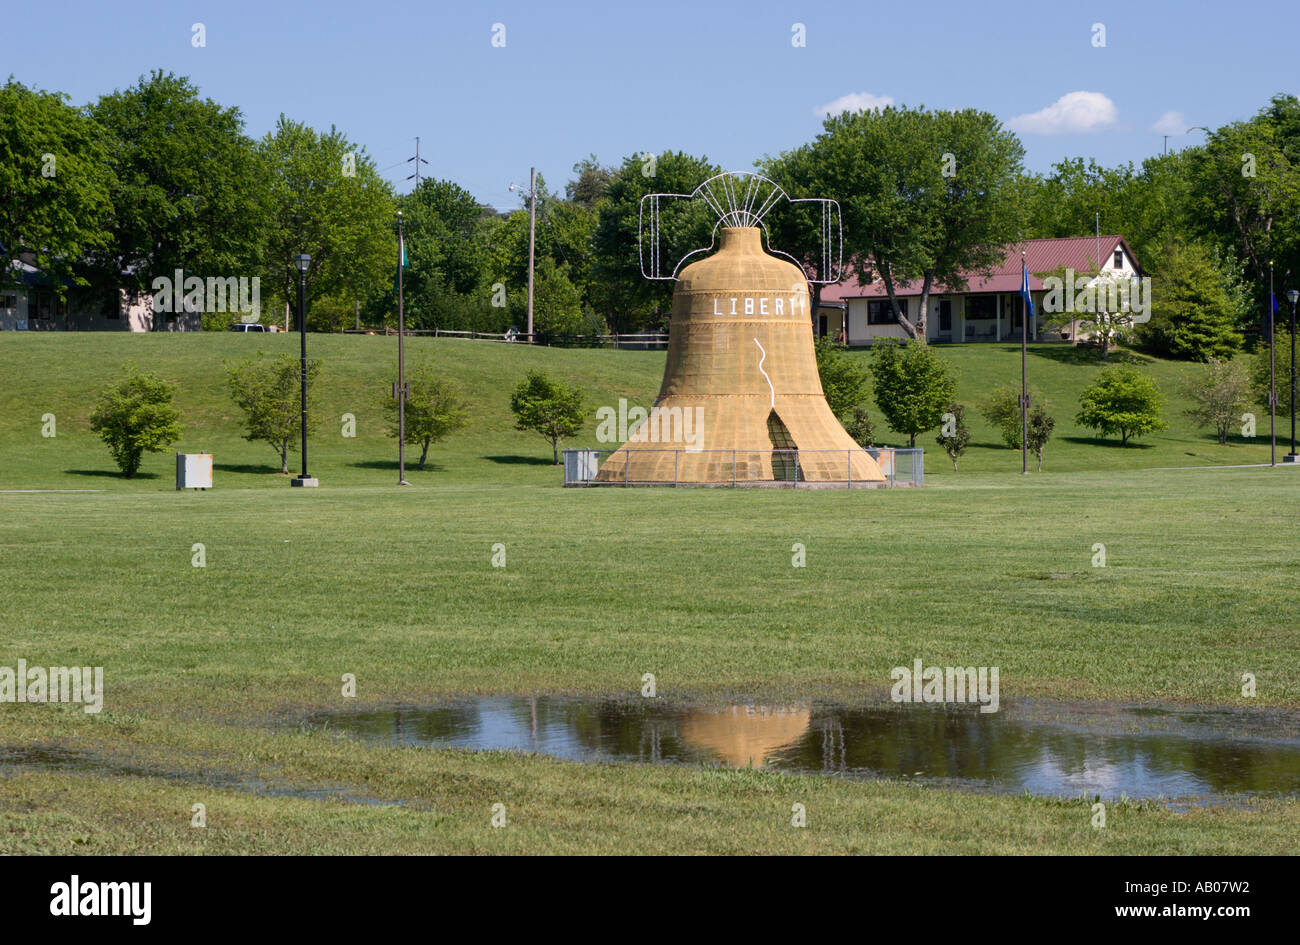 Large cracked liberty bell pays homage to Sevier County war veterans in Patriot Park at Pigeon Forge, Tennessee, USA Stock Photo